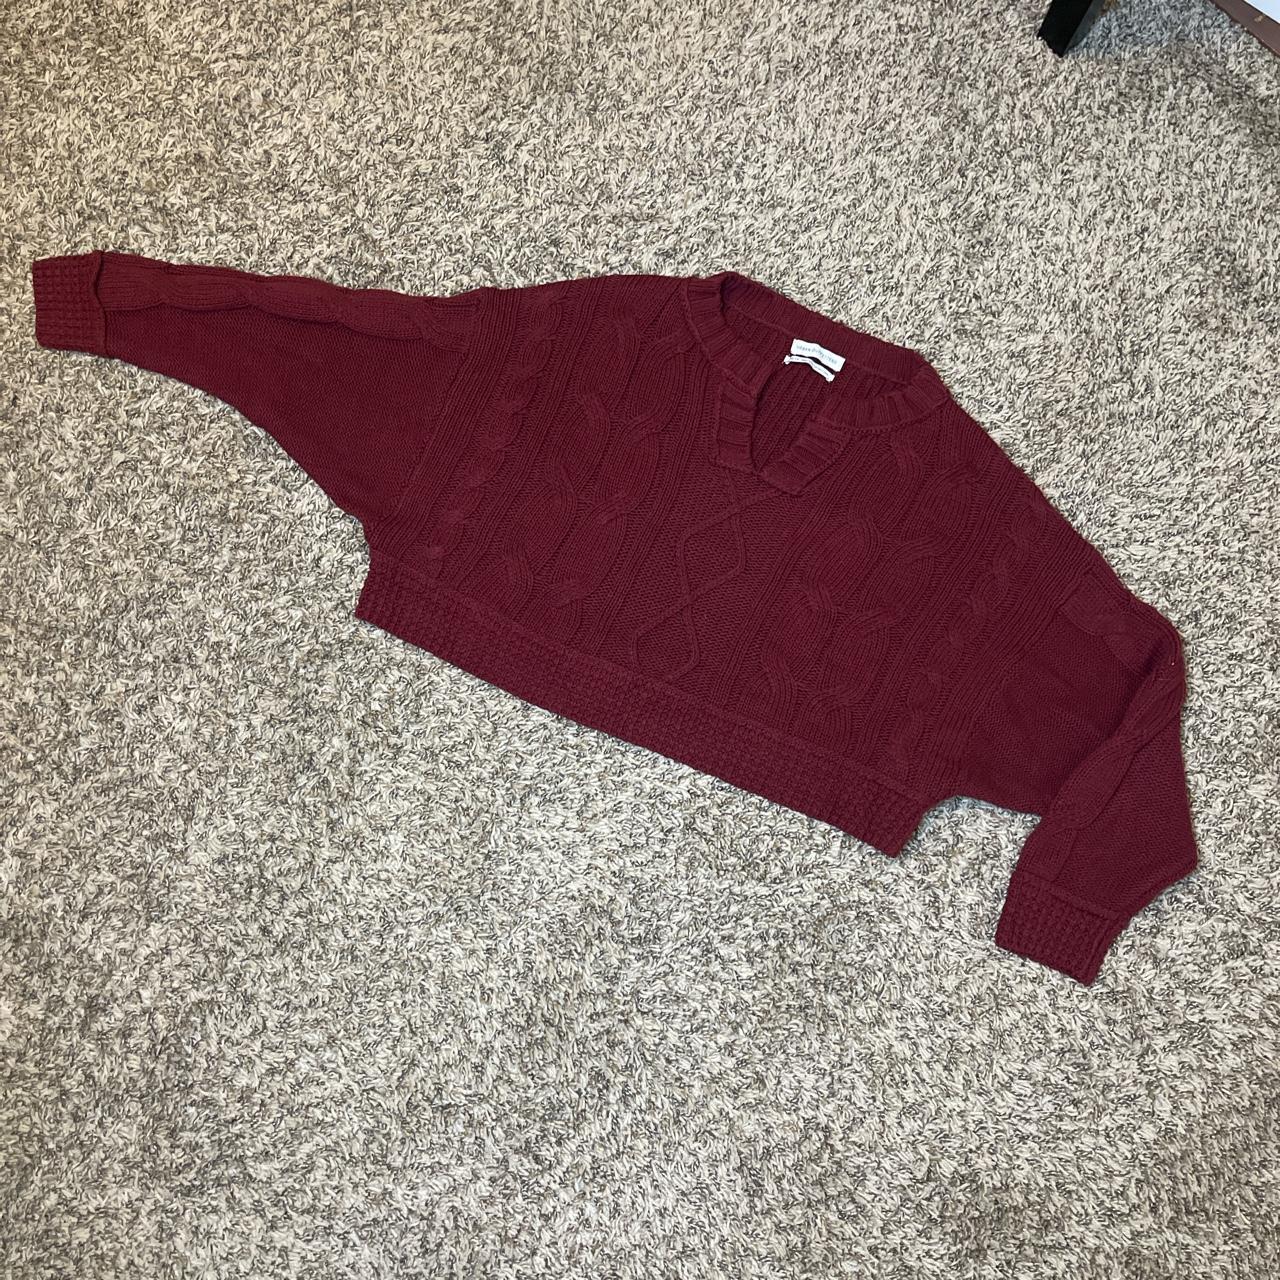 Cropped knit sweater in burgundy. #knit #knittop... - Depop